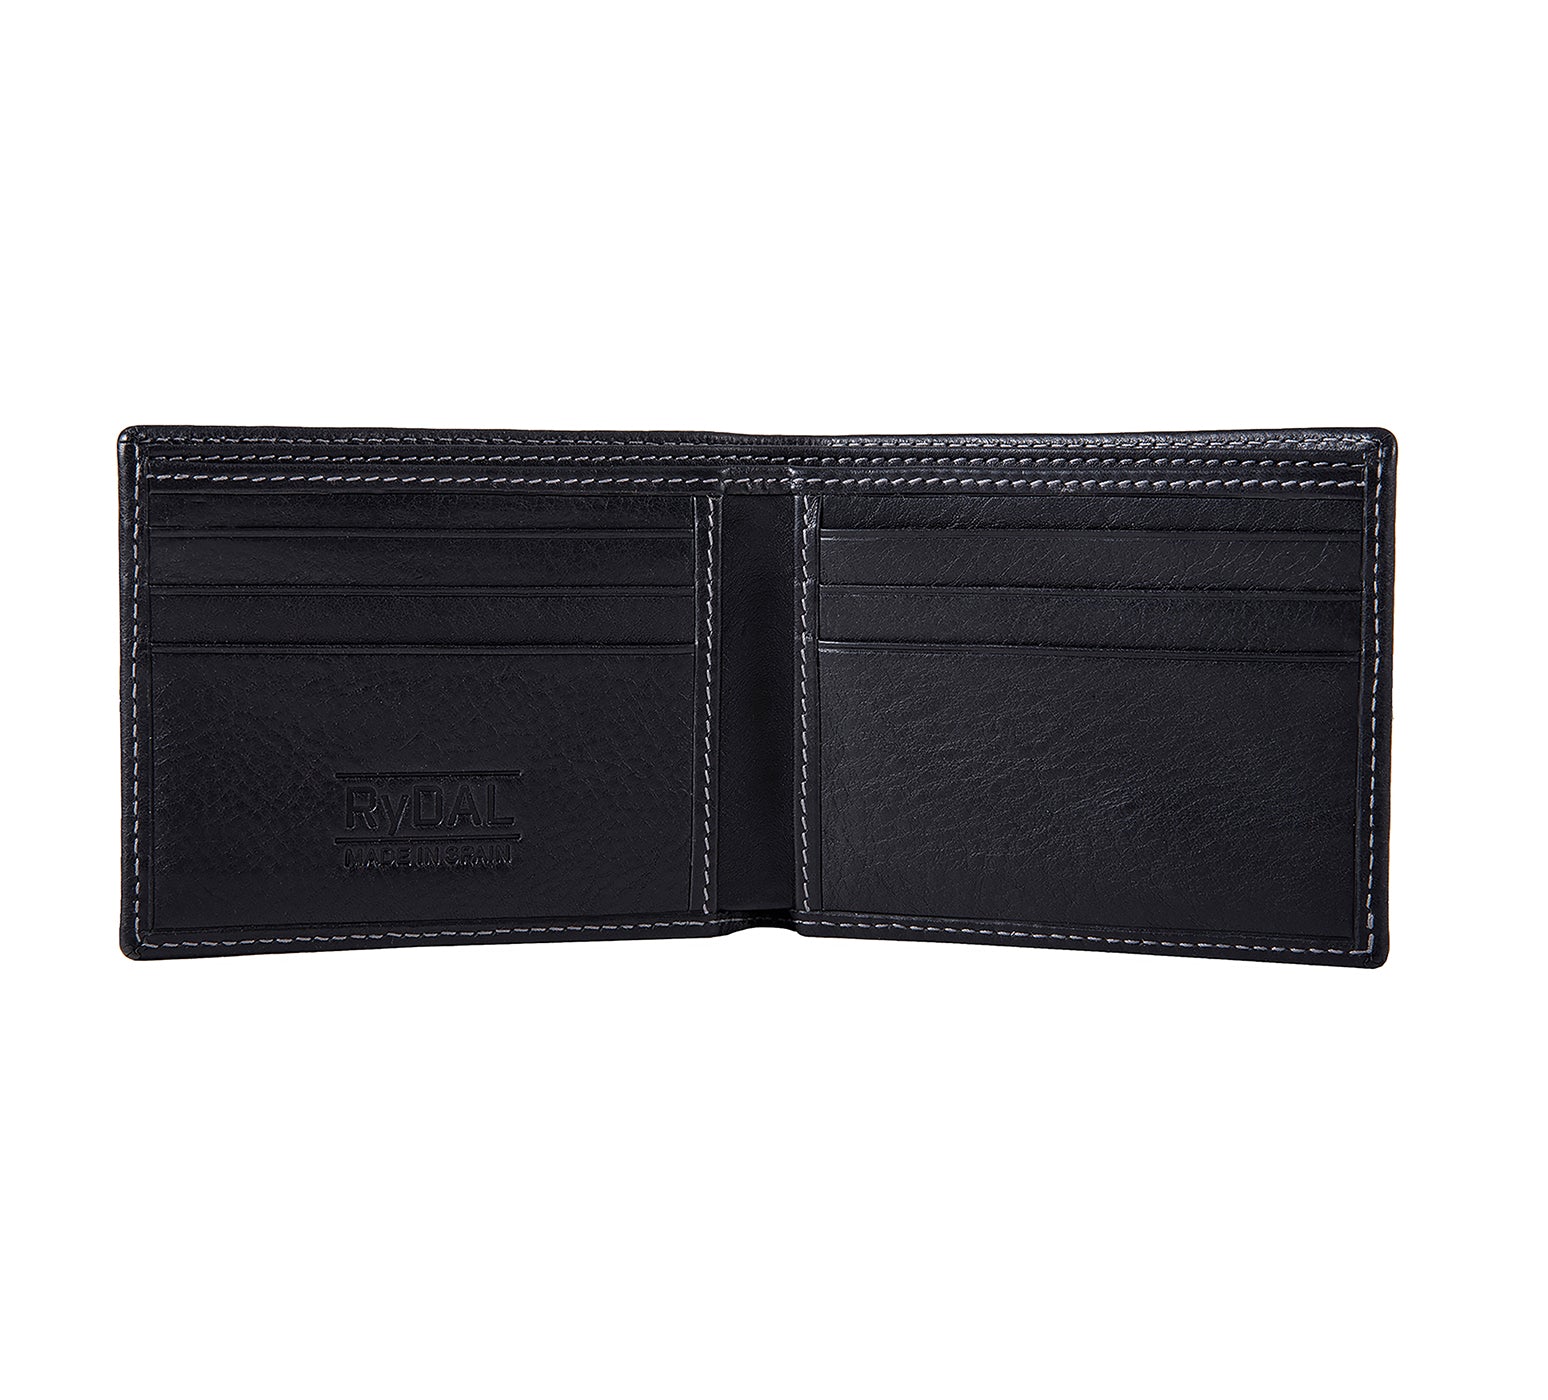 Mens Leather Wallet from Rydal in 'Black' showing interior.